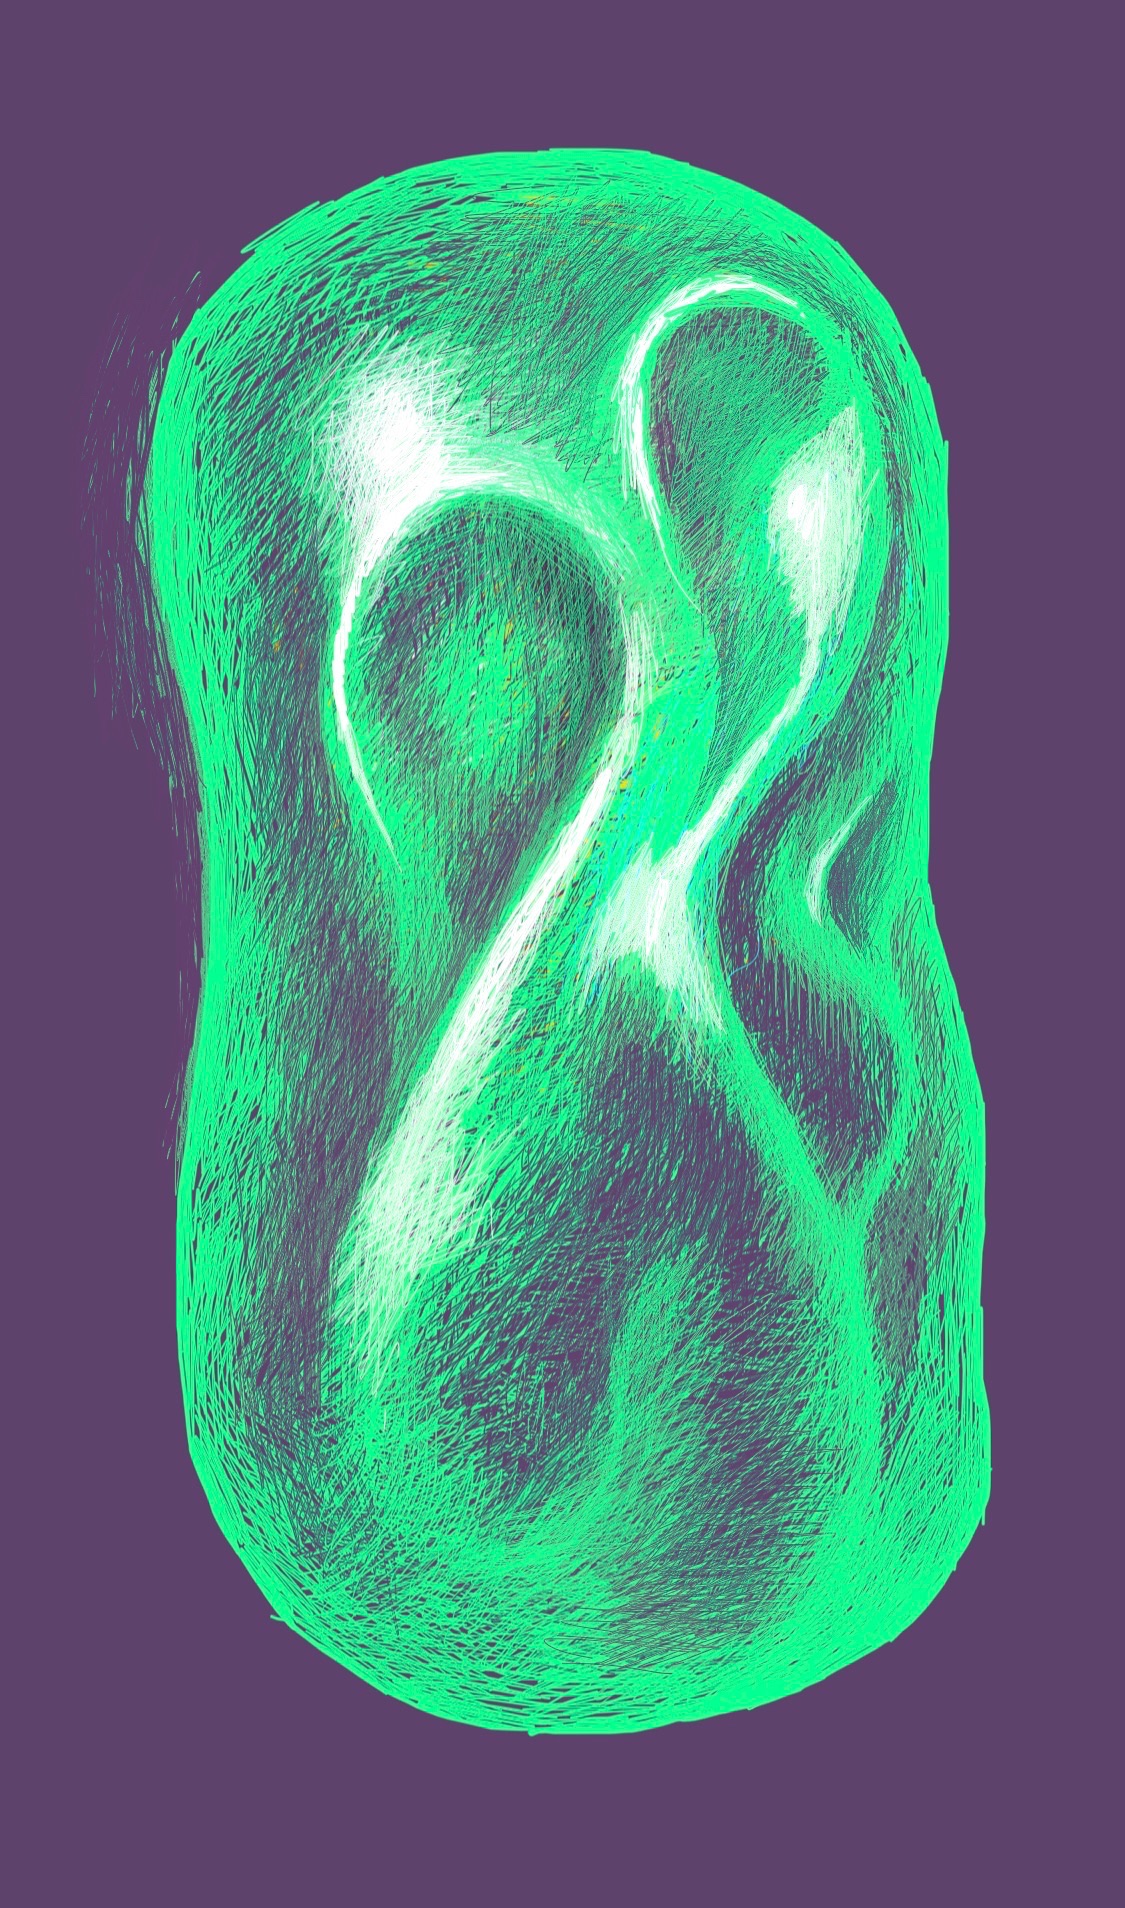 A green, polished abstract blob of something. I don't know, I've never really liked this one.